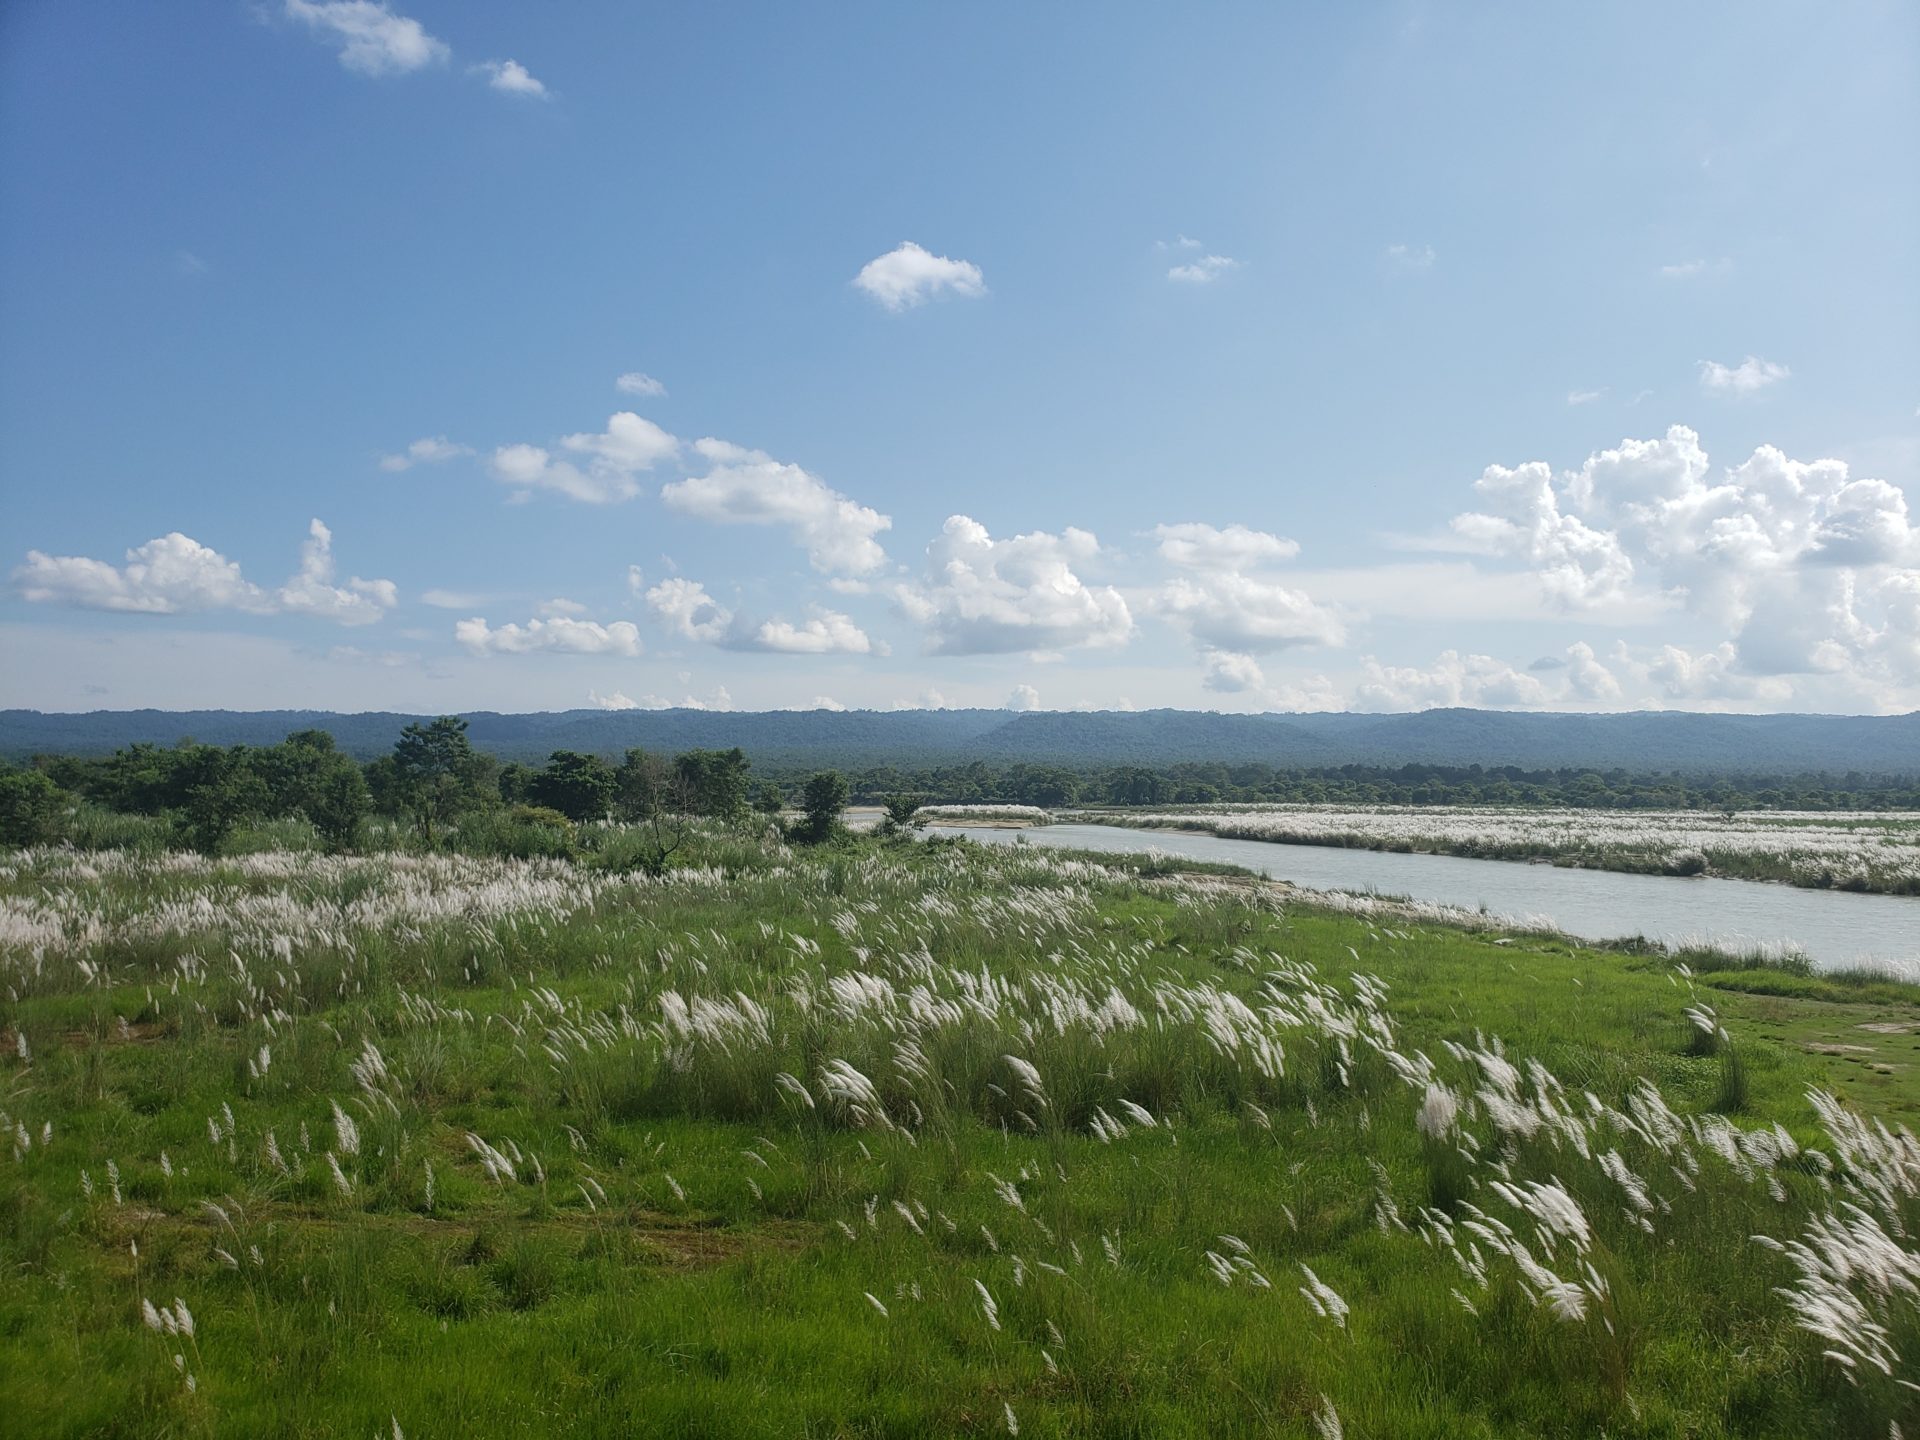 a grassy field with white flowers and a river